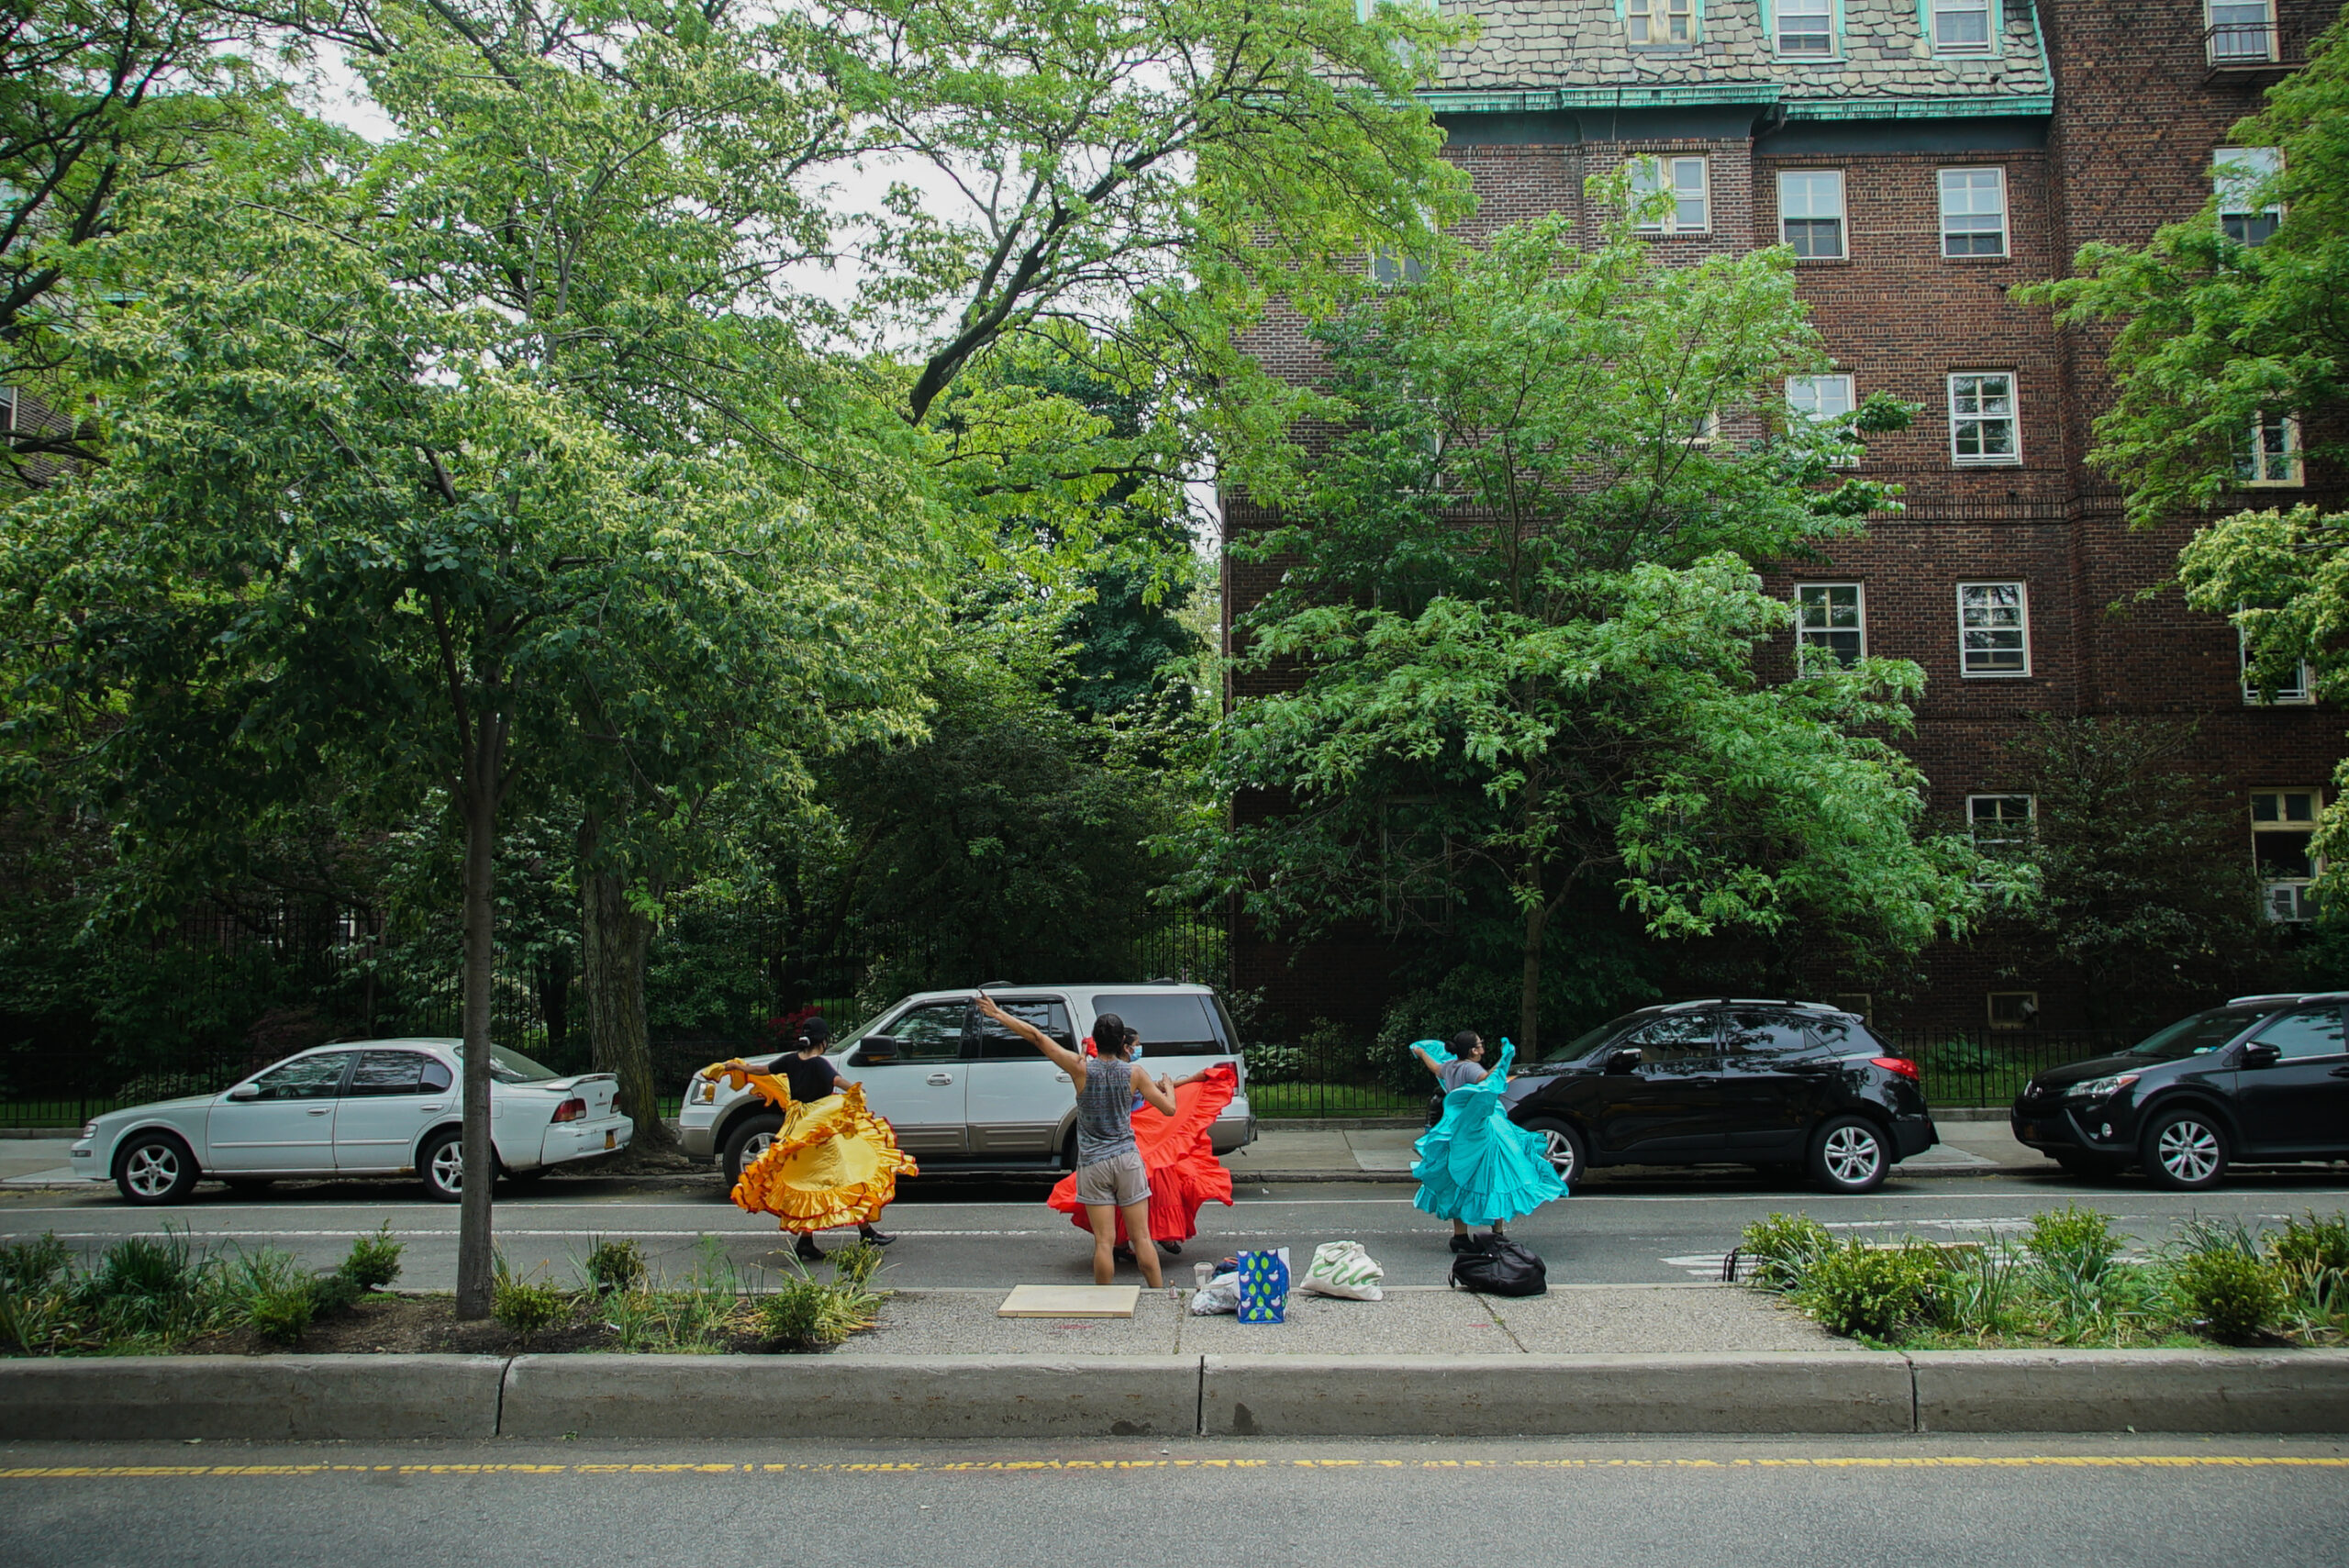 Erick and three dancers are in the middle of a move as they rehearse on 34th Avenue. The dancers are spinning and their colorful skirts are swirling around them. Erick stands in front with outstretched arms, directing them. Behind them are tall trees and apartment buildings.